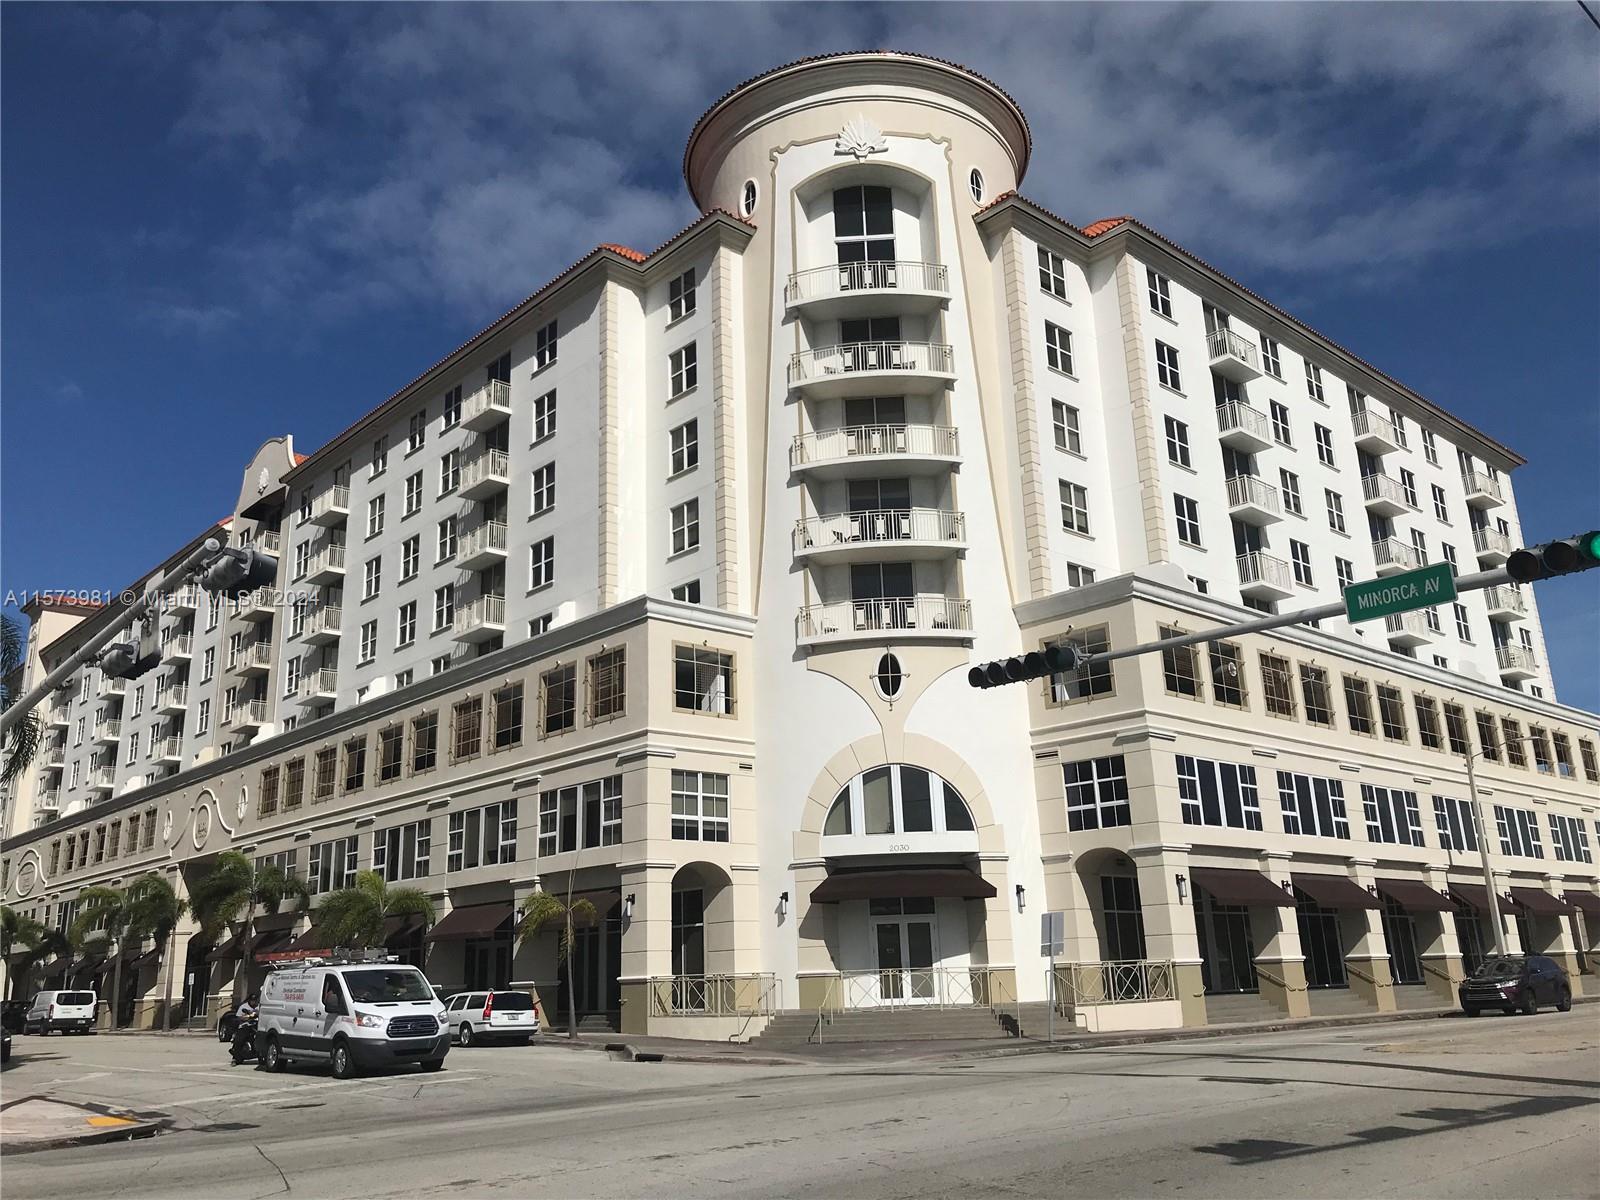 Beautiful 2 bedroom 2 bathroom split floorplan unit for rent at The Minorca in the heart of Coral Gables.  Walking distance to shopping, restaurants, schools, supermarkets, and major arteries of transportation.